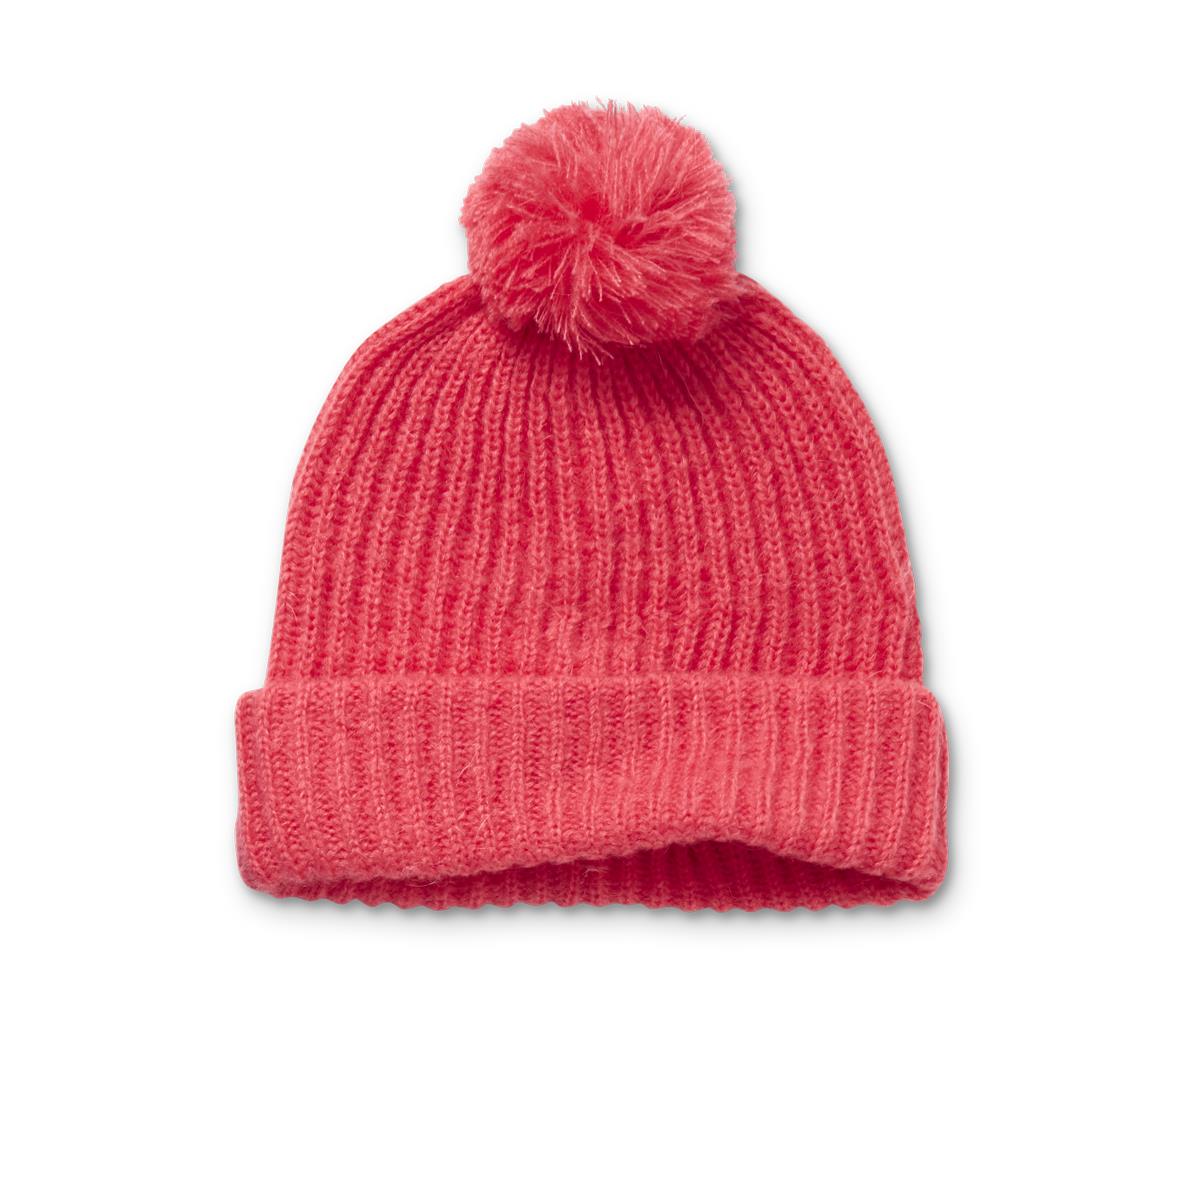 SPROET & SPROUT - BEANIE POMPON RASPBERRY PINK